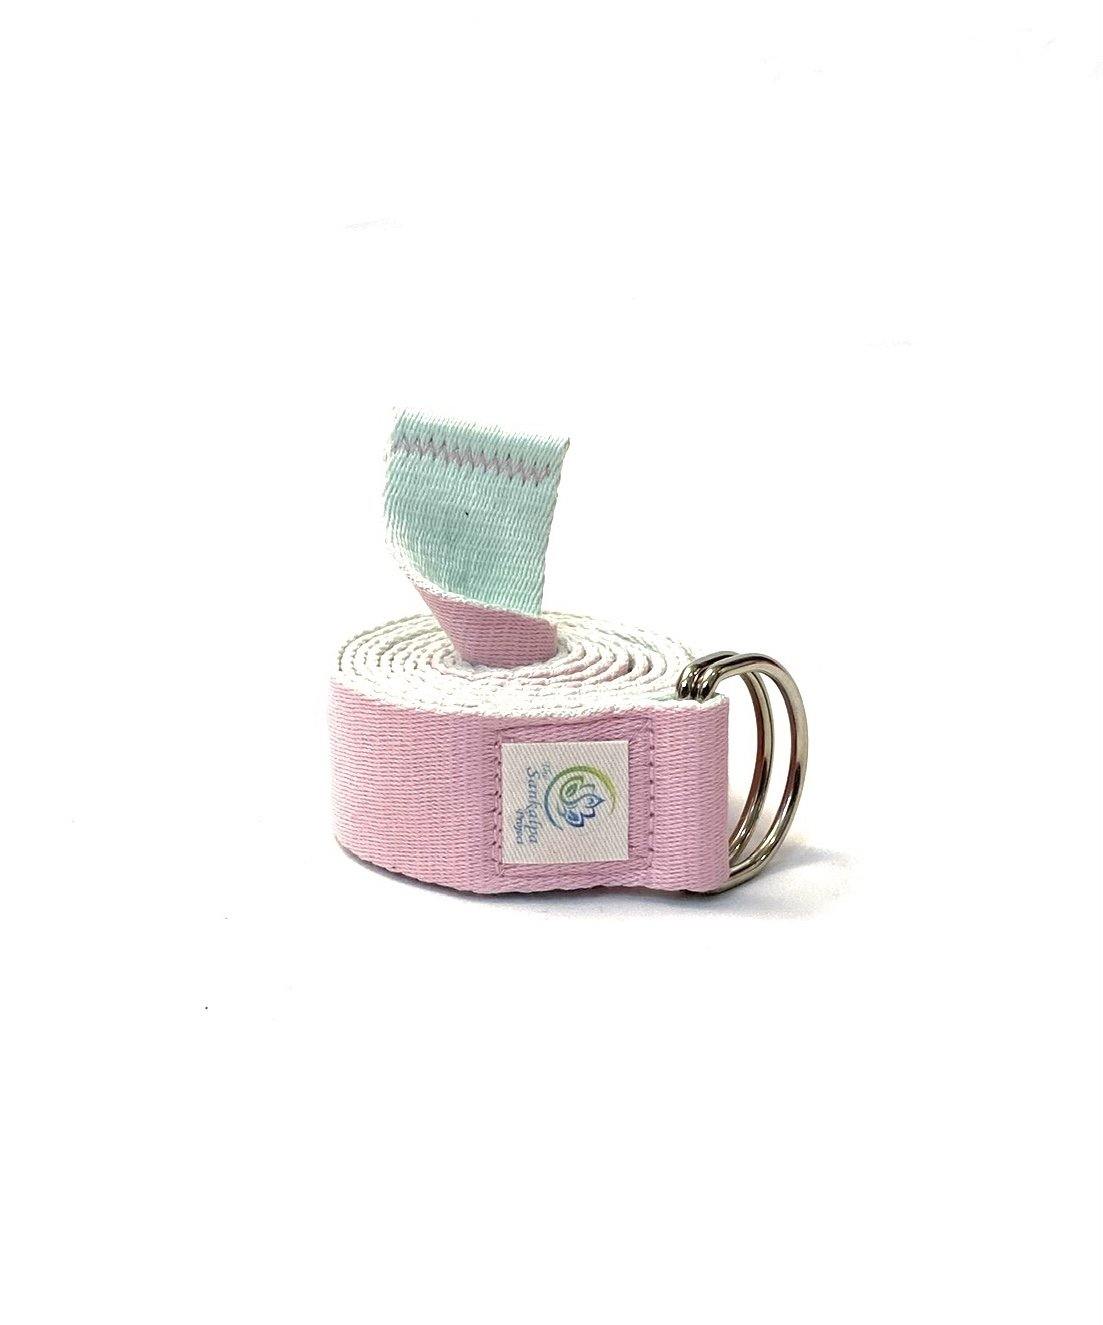 Pink Two-toned Cotton Yoga Strap - The Sankalpa Project